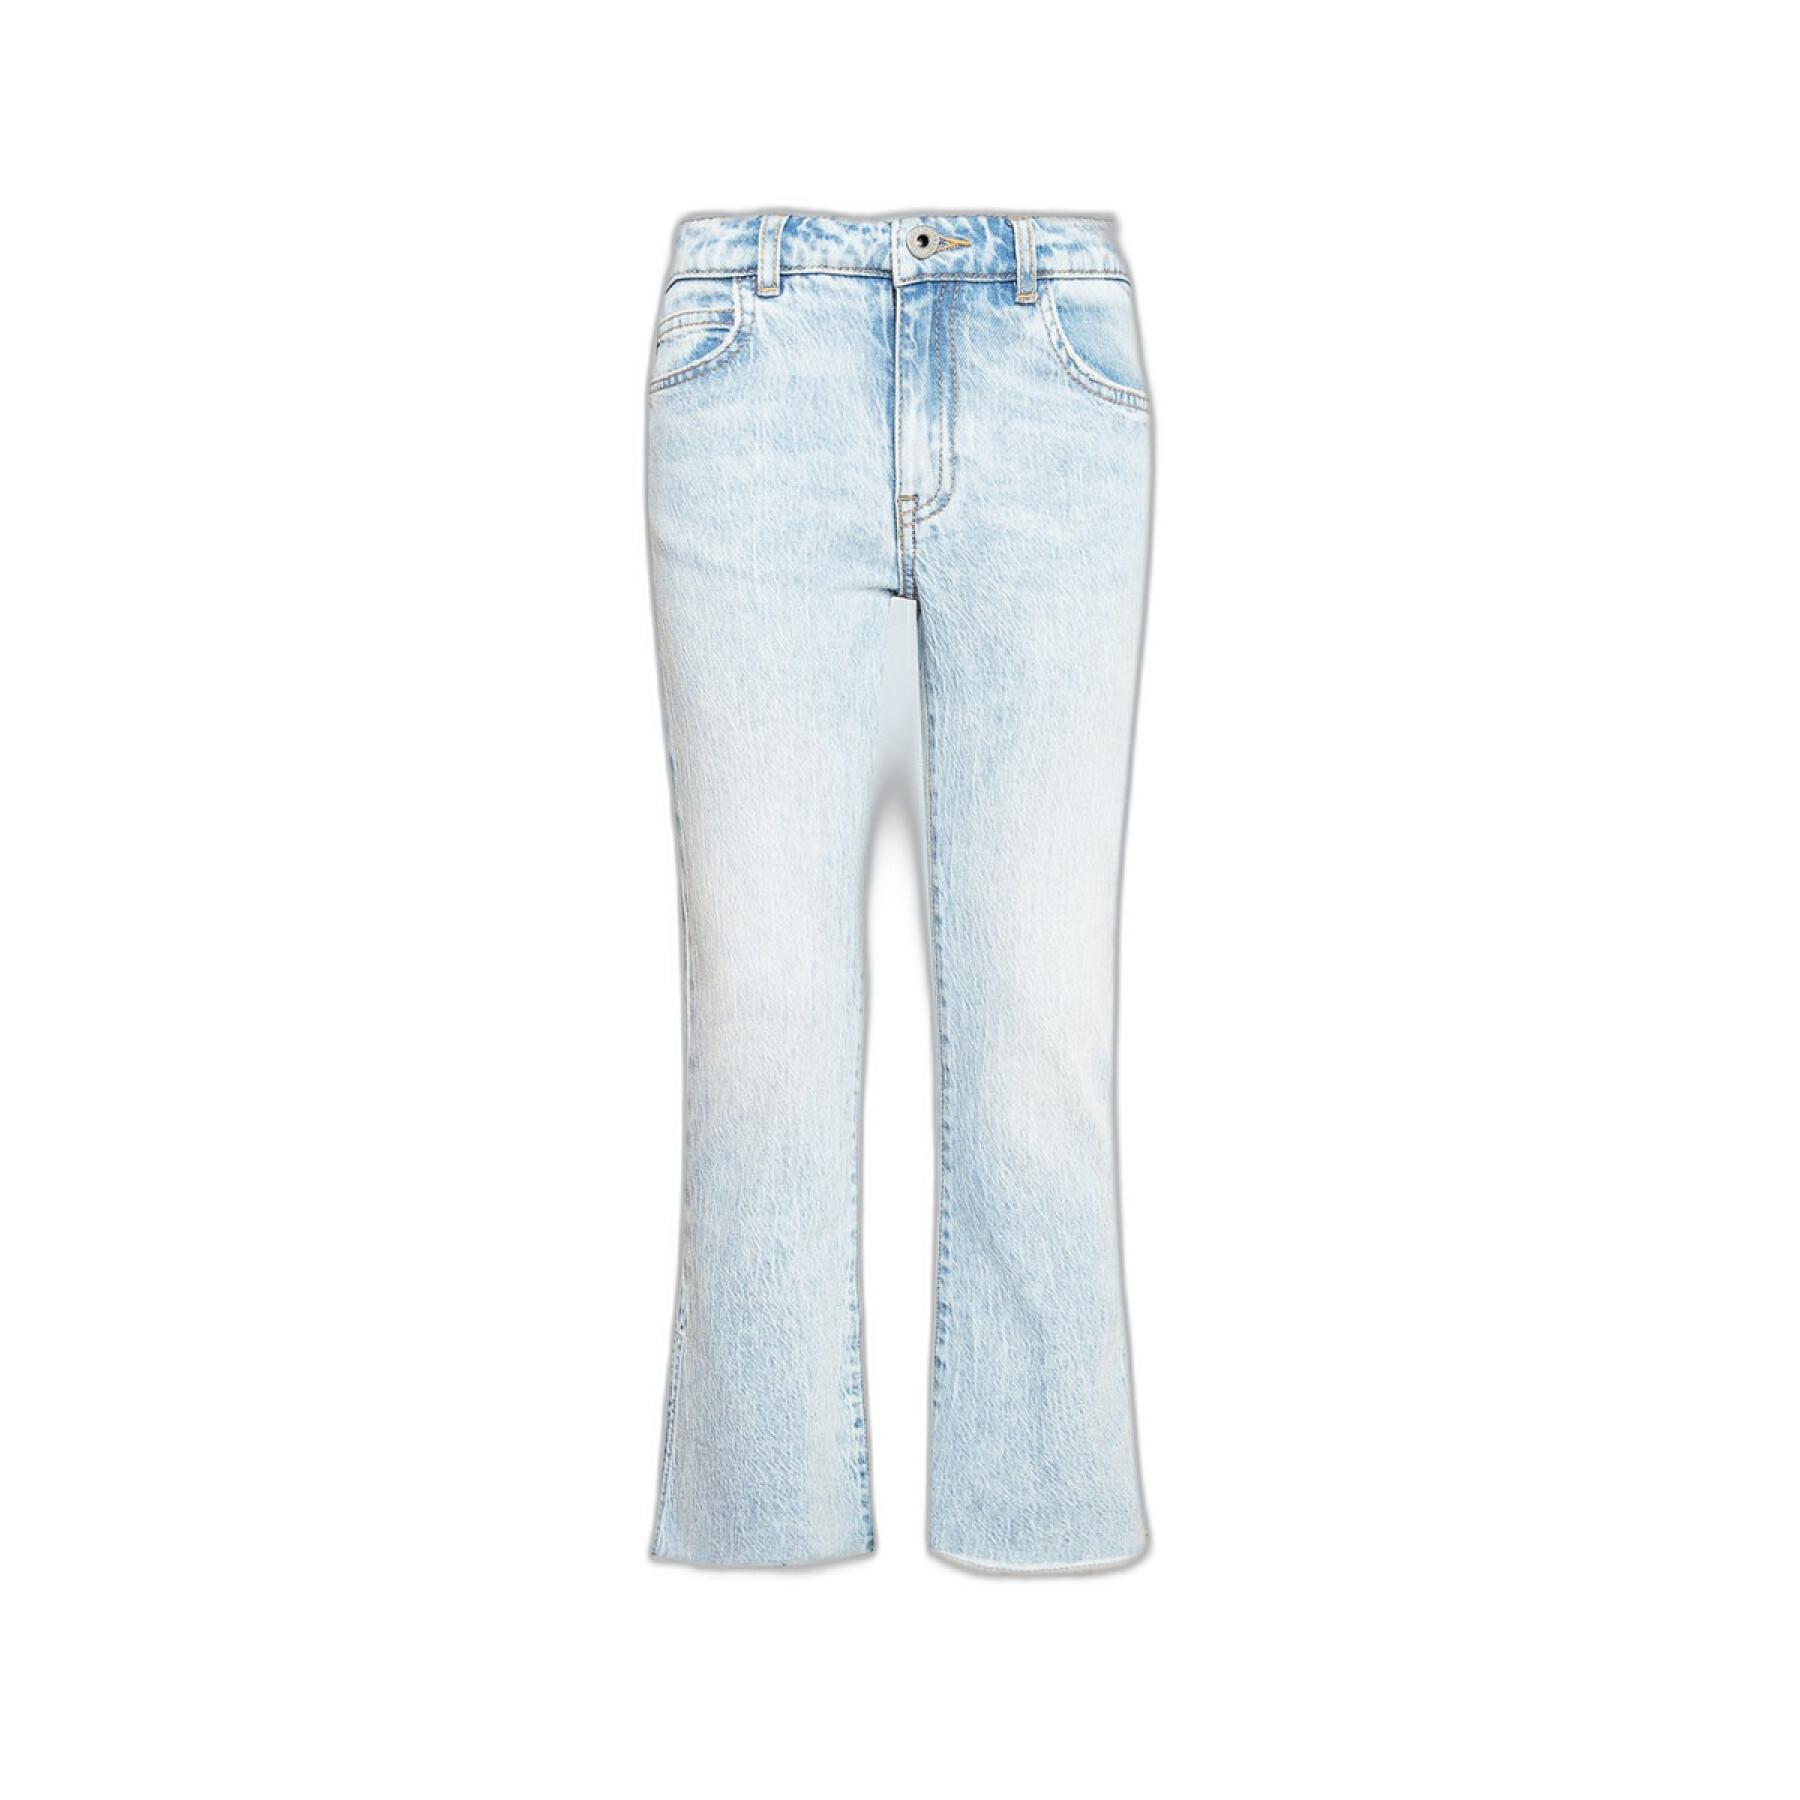 Mädchen-Jeans Pepe Jeans Kimberly Flare